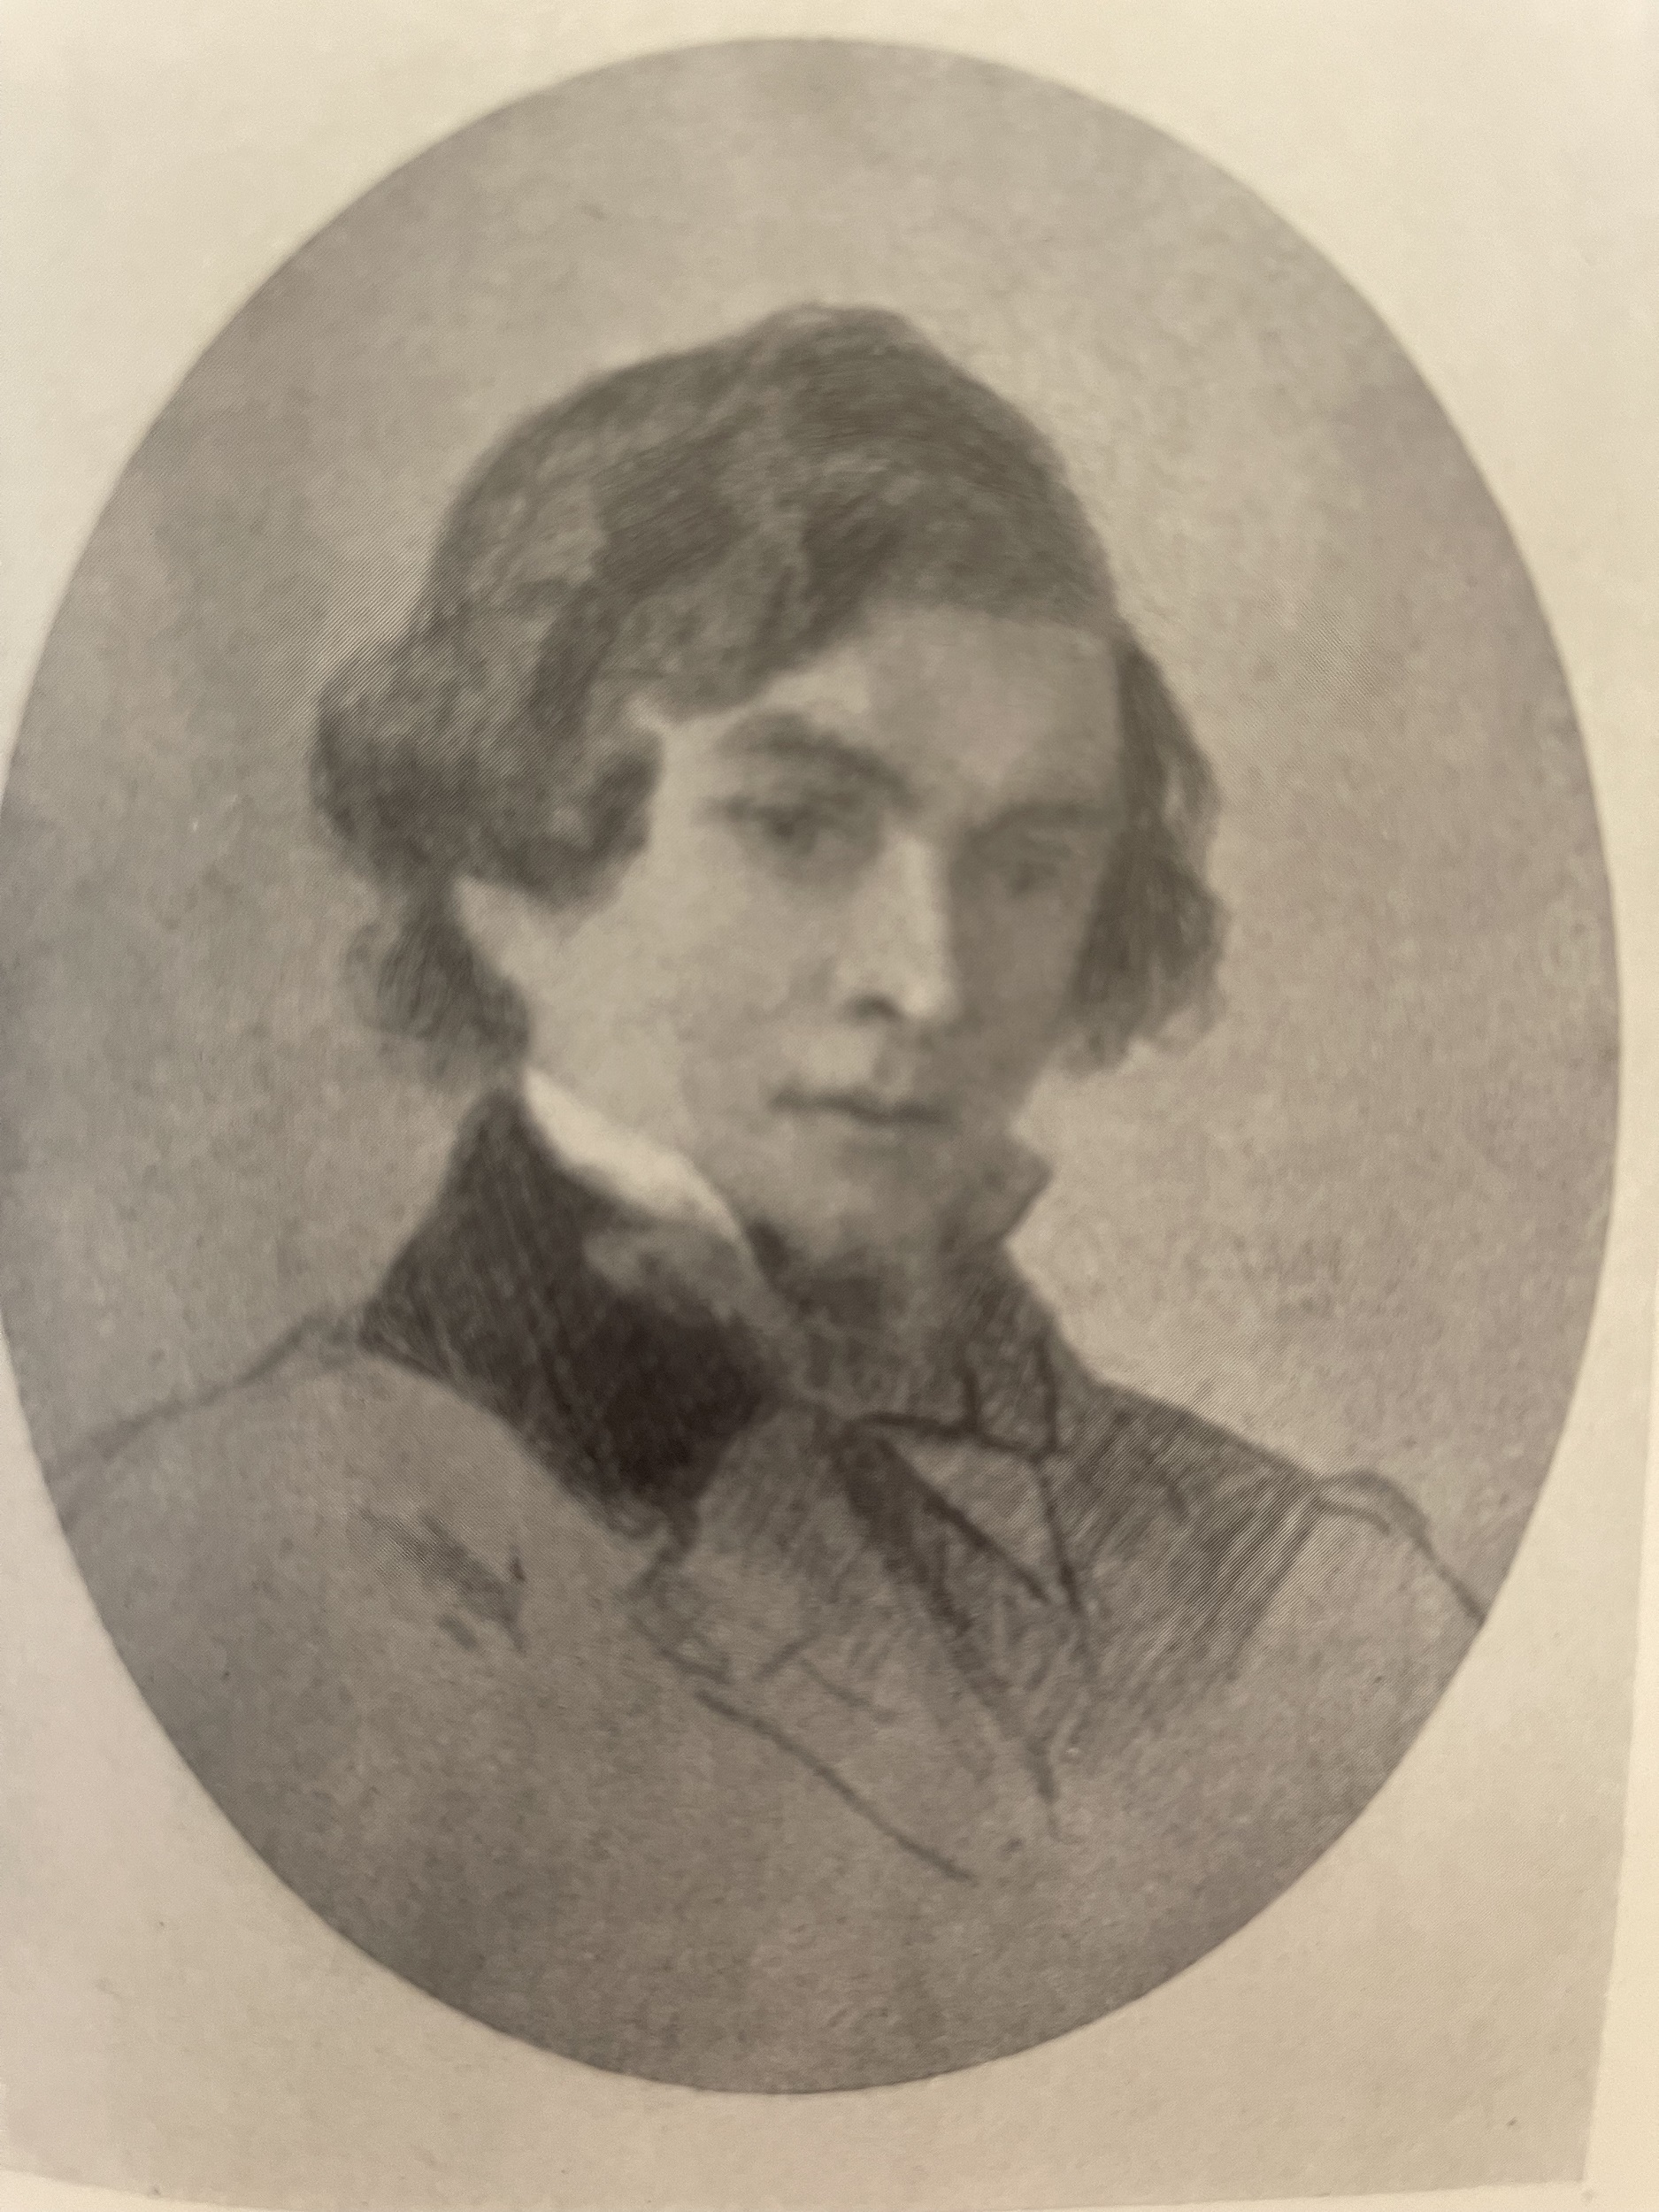 Black and white reproduction of a crayon portrait of a young man in a suit and cravat.